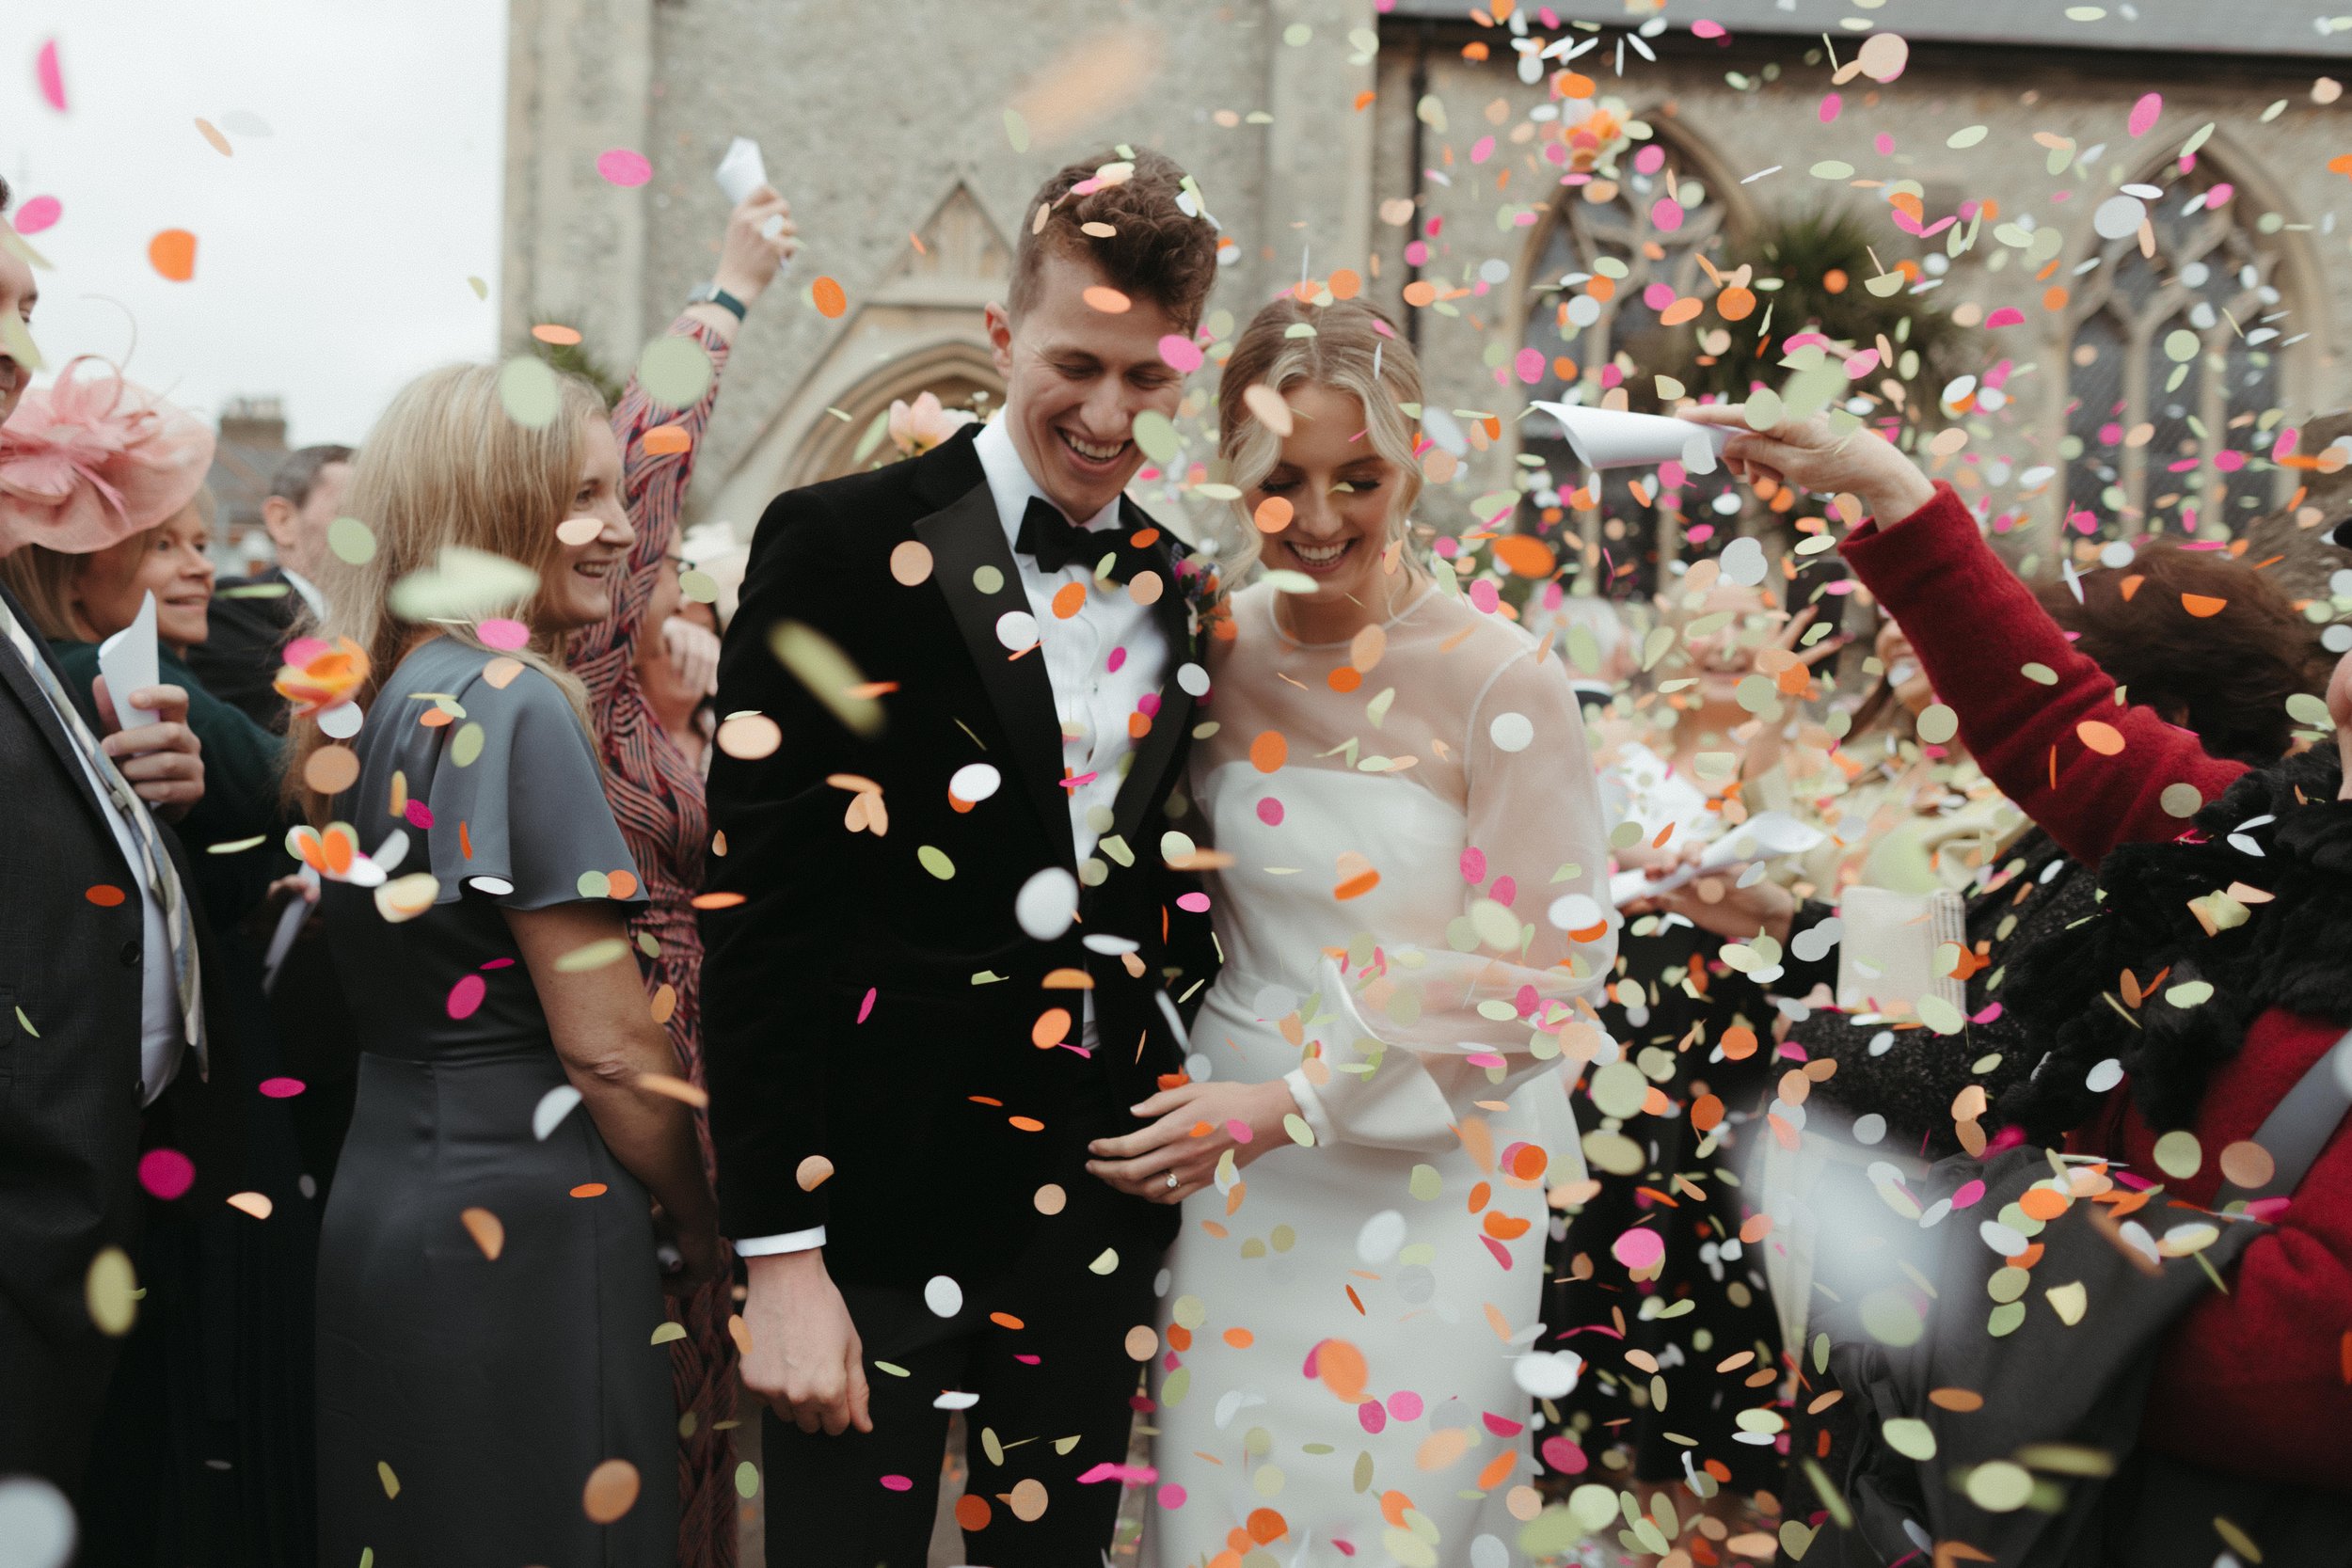 Beautiful bride Anna wears the Oliver dress with the Daniel top and Alpha bow | Wedding dresses by Halfpenny London